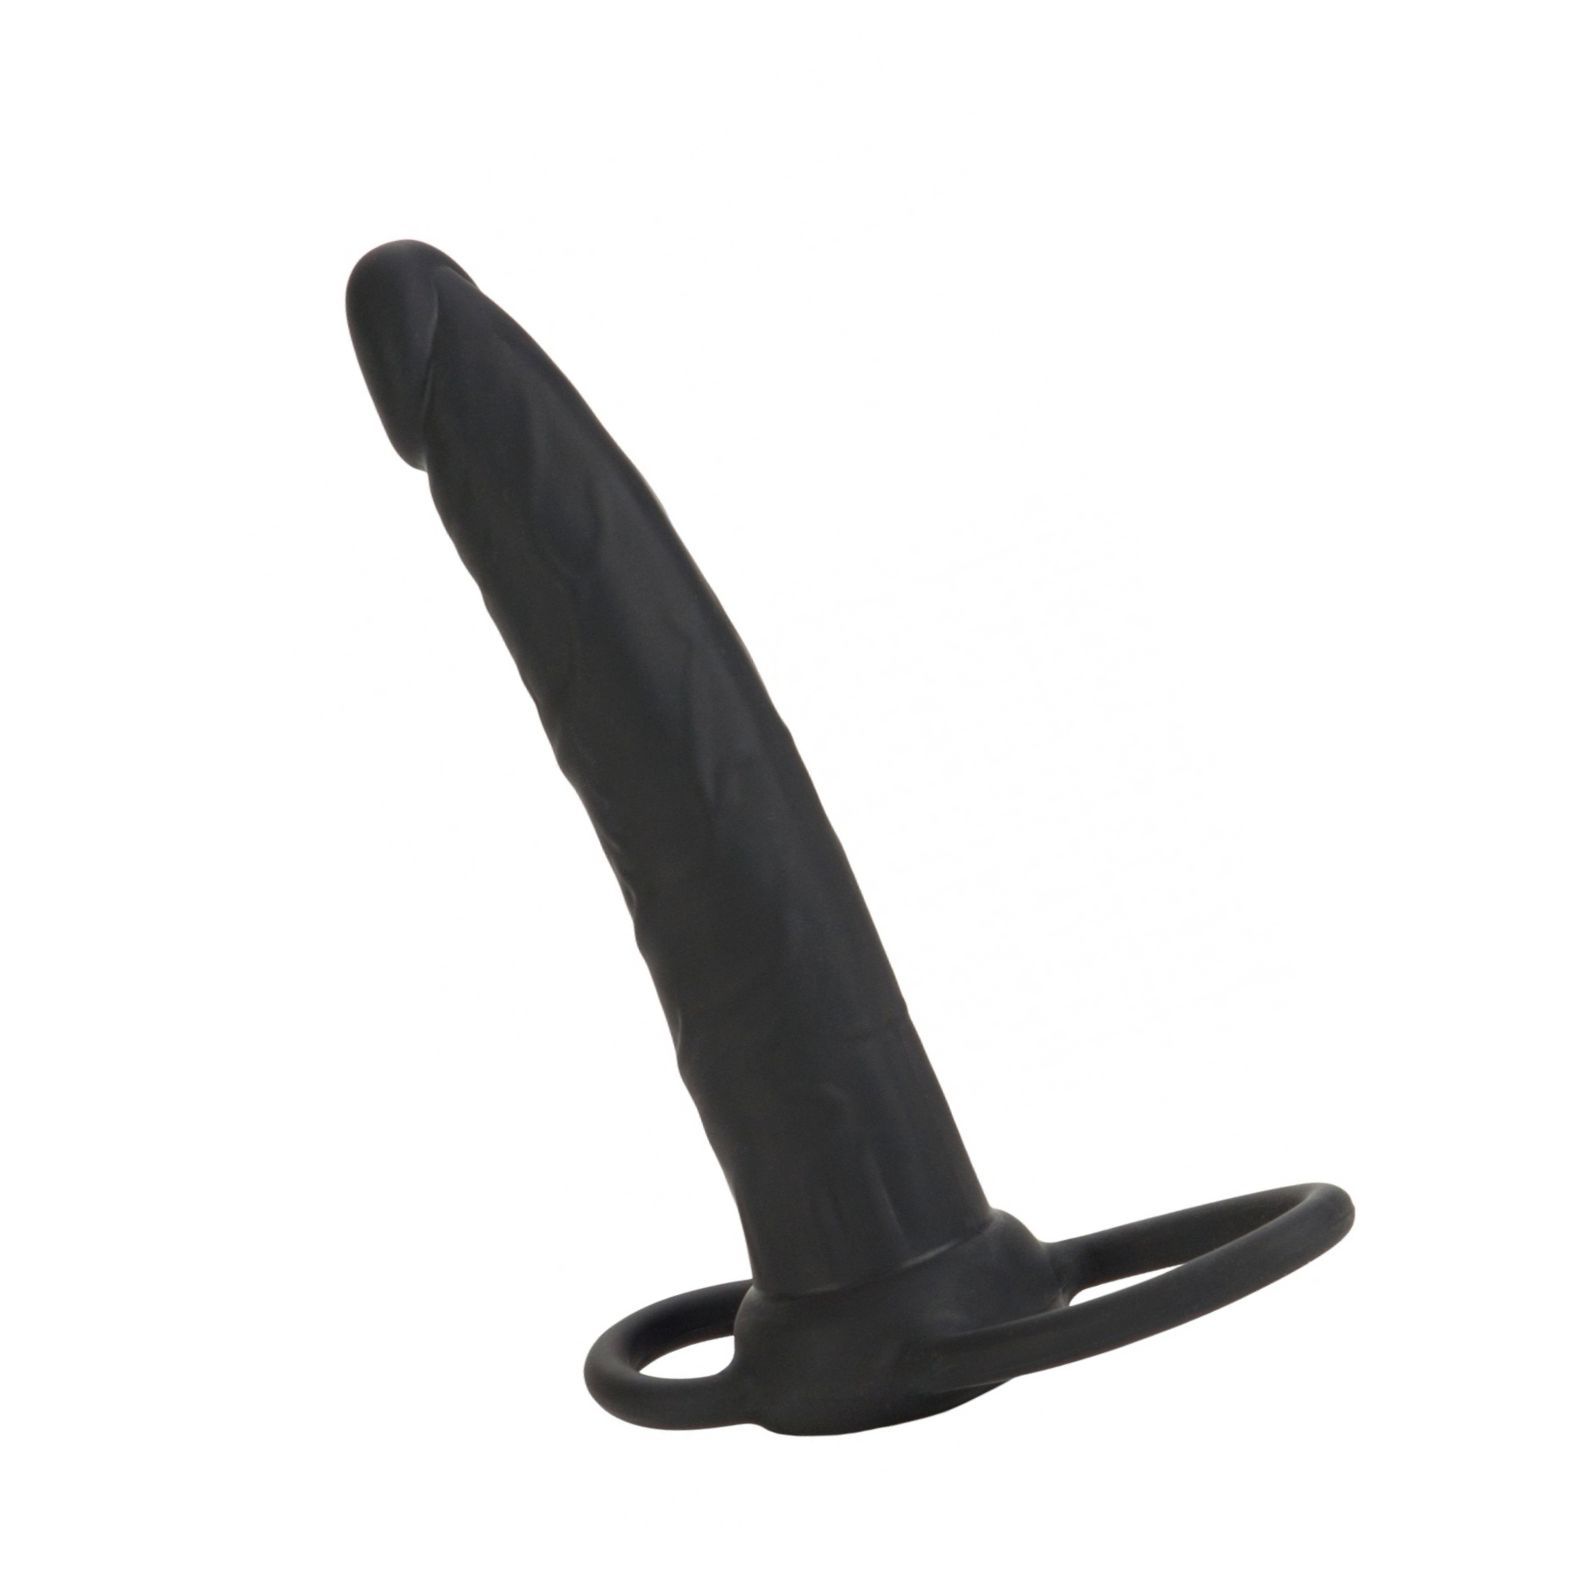 Strap-On Silicone Double Rider